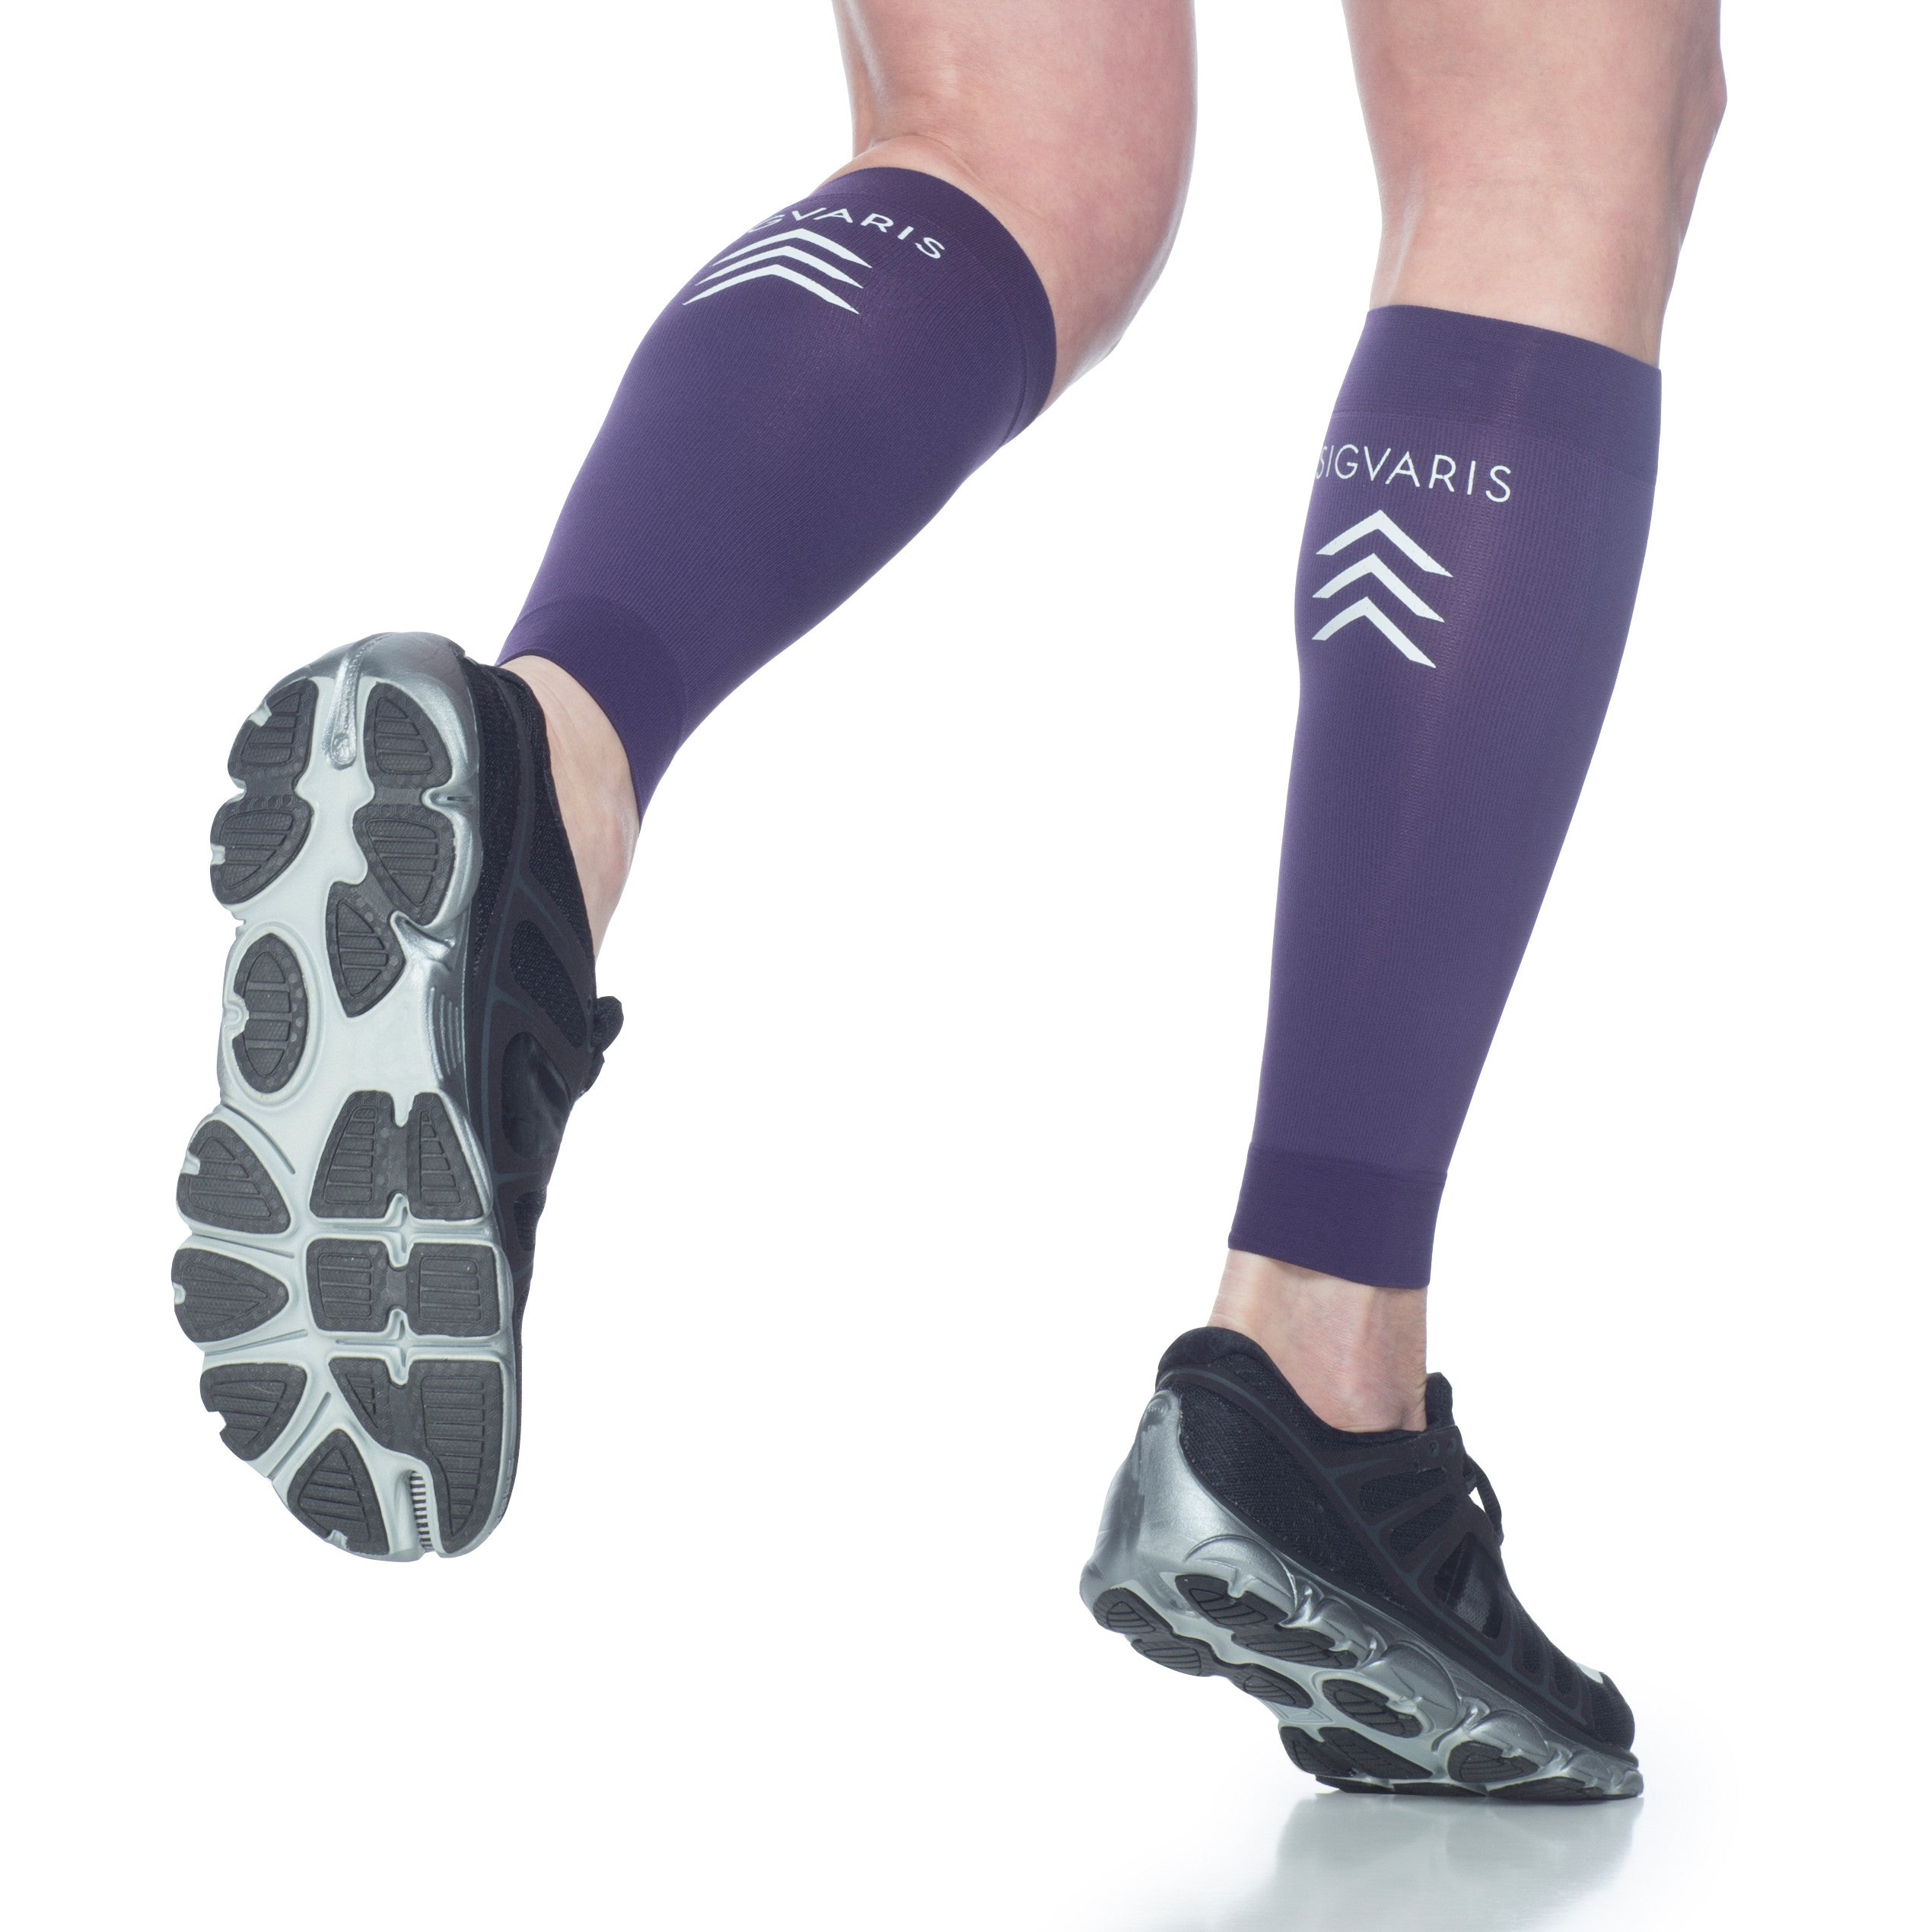 Sigvaris Well Being 412V Athletic Performance Leg Sleeves - 20-30